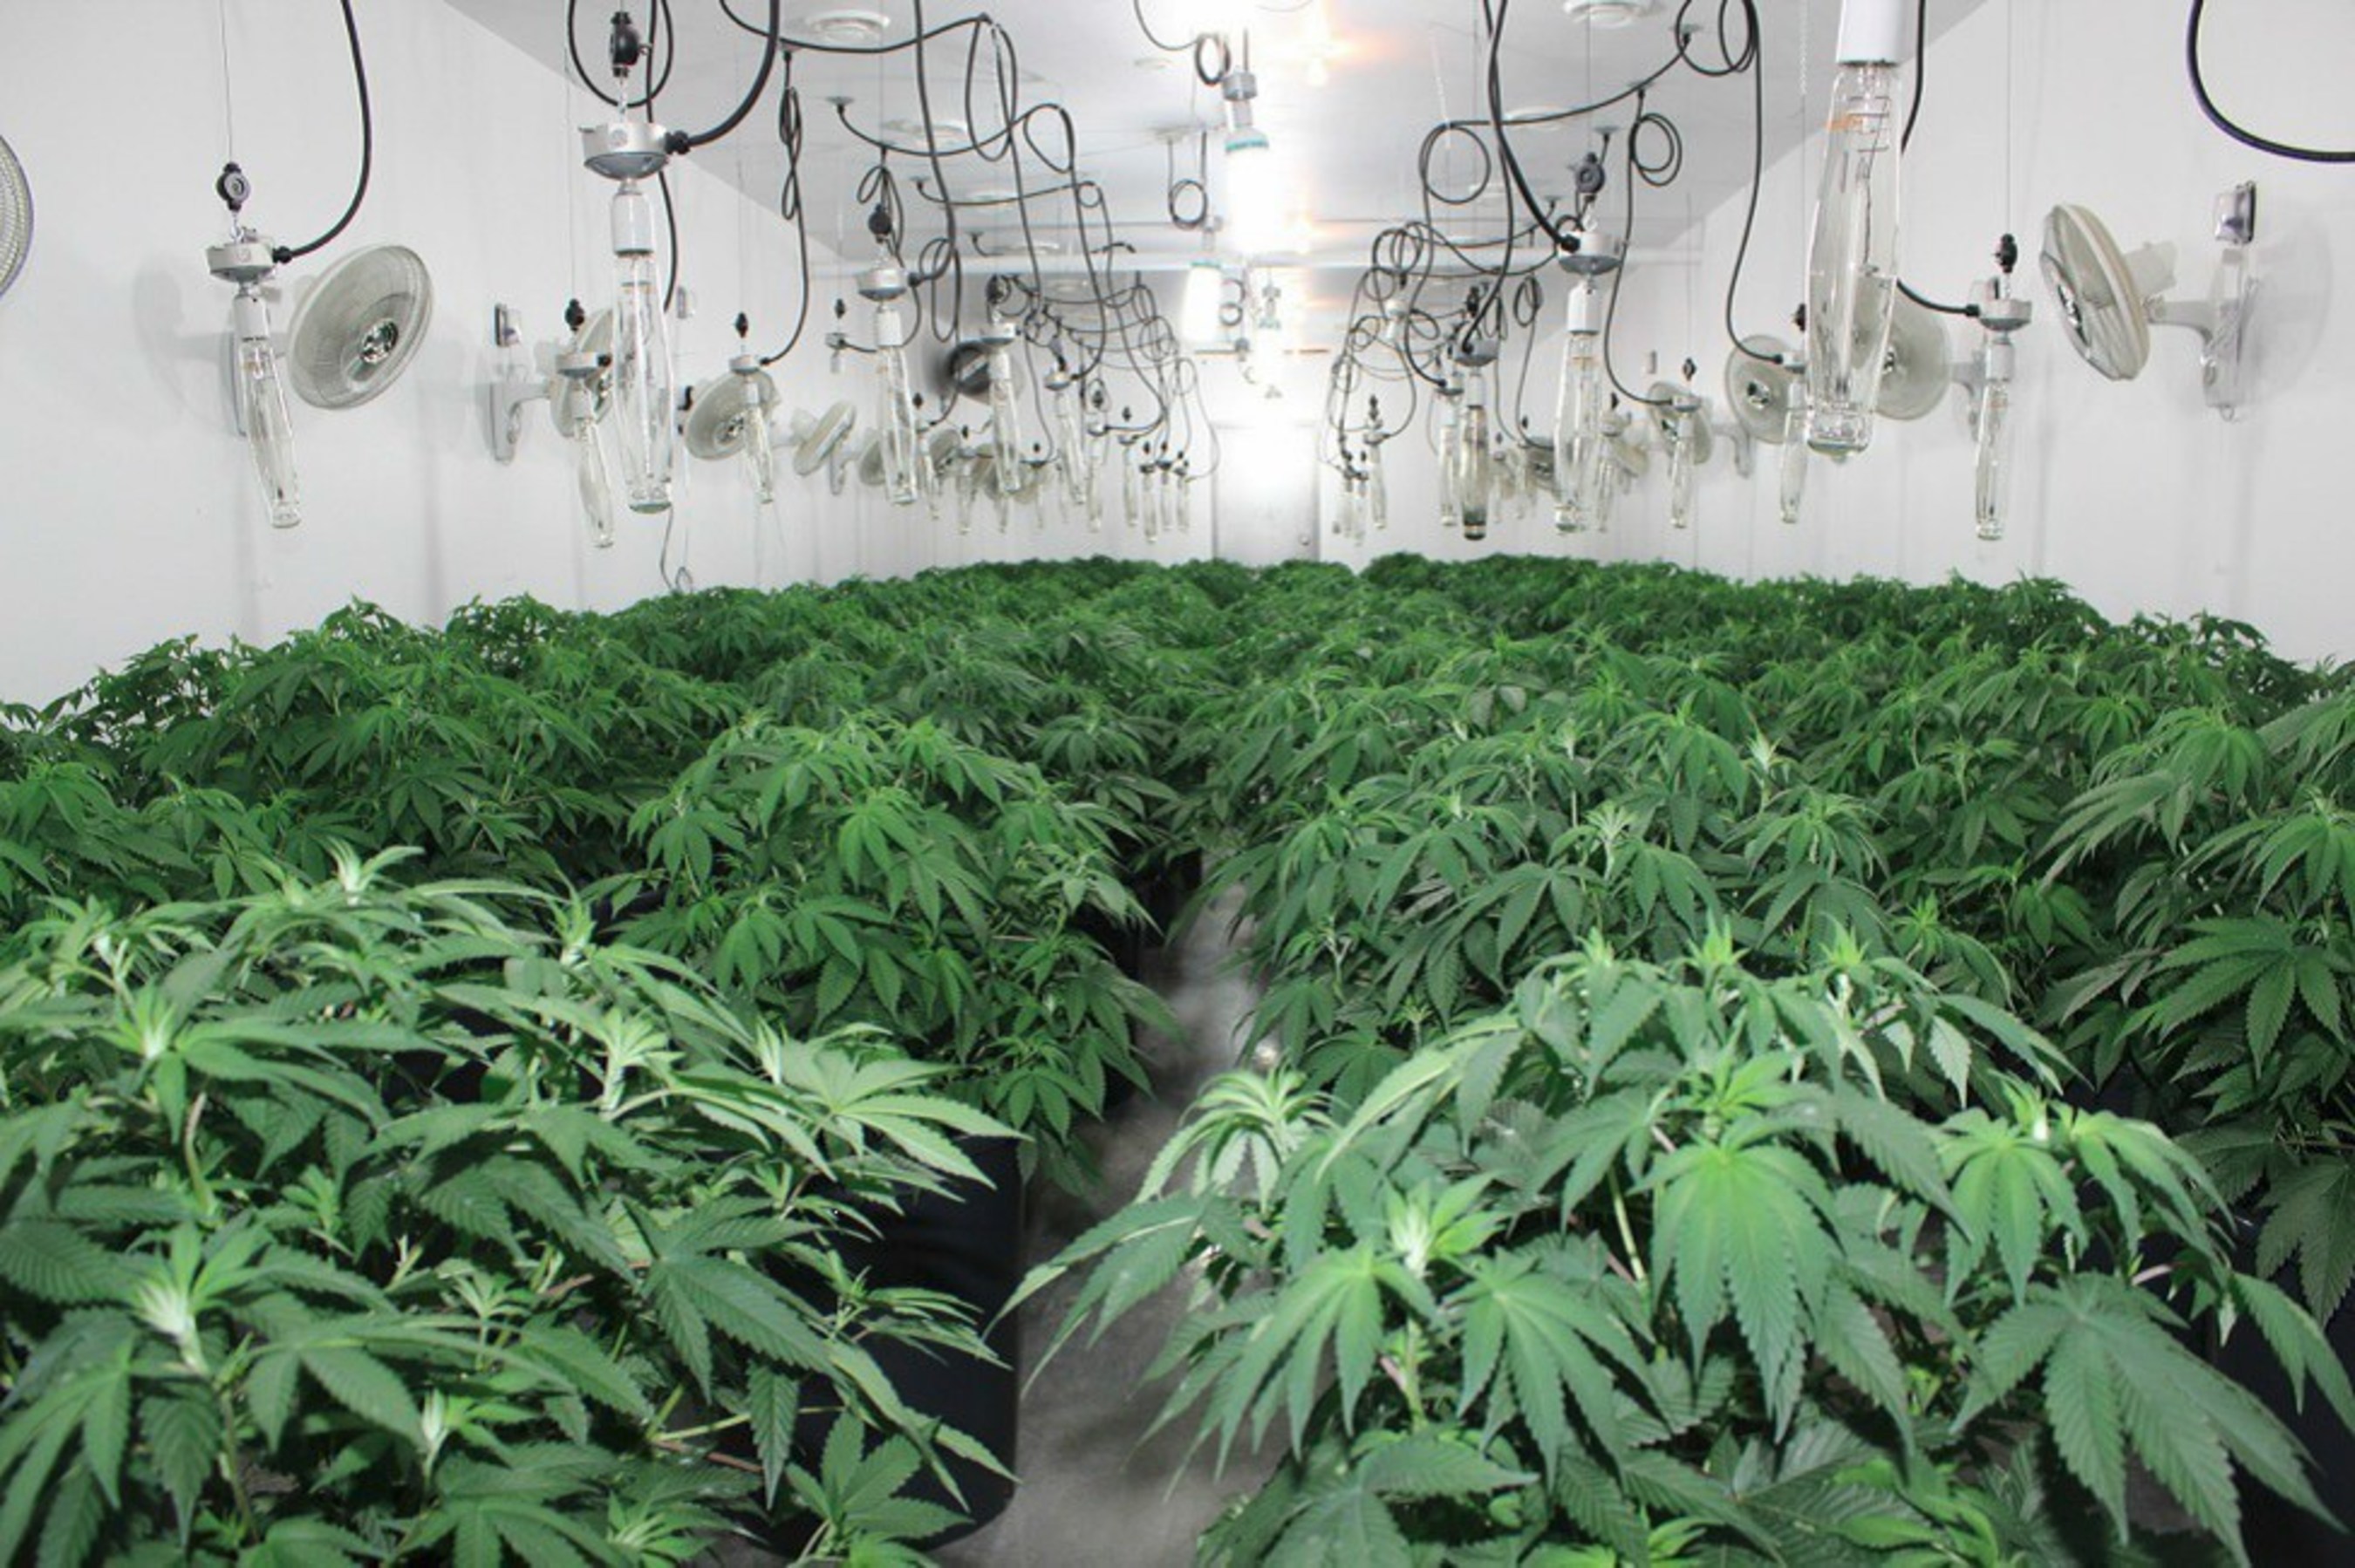 This is one of several growing rooms located in the facility.